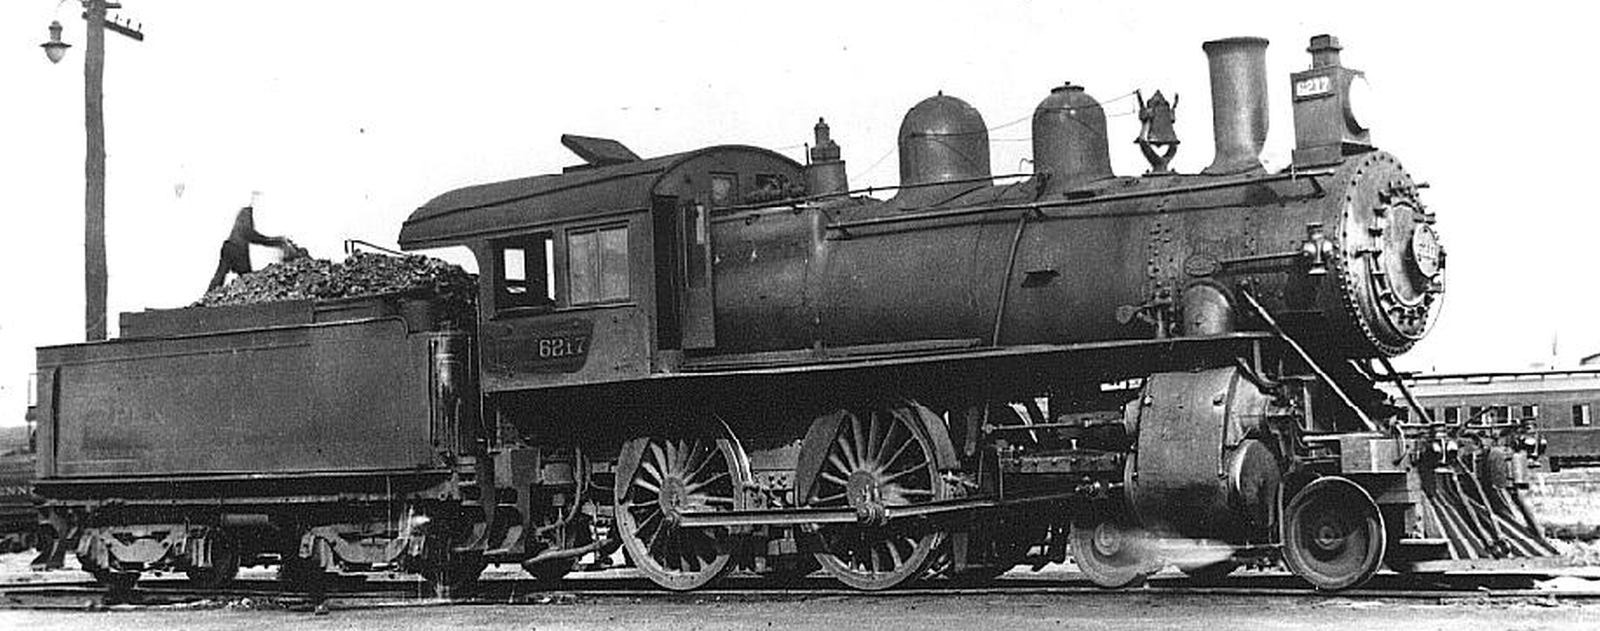 D16sb No. 6217 in January 1916 at Olean, New York